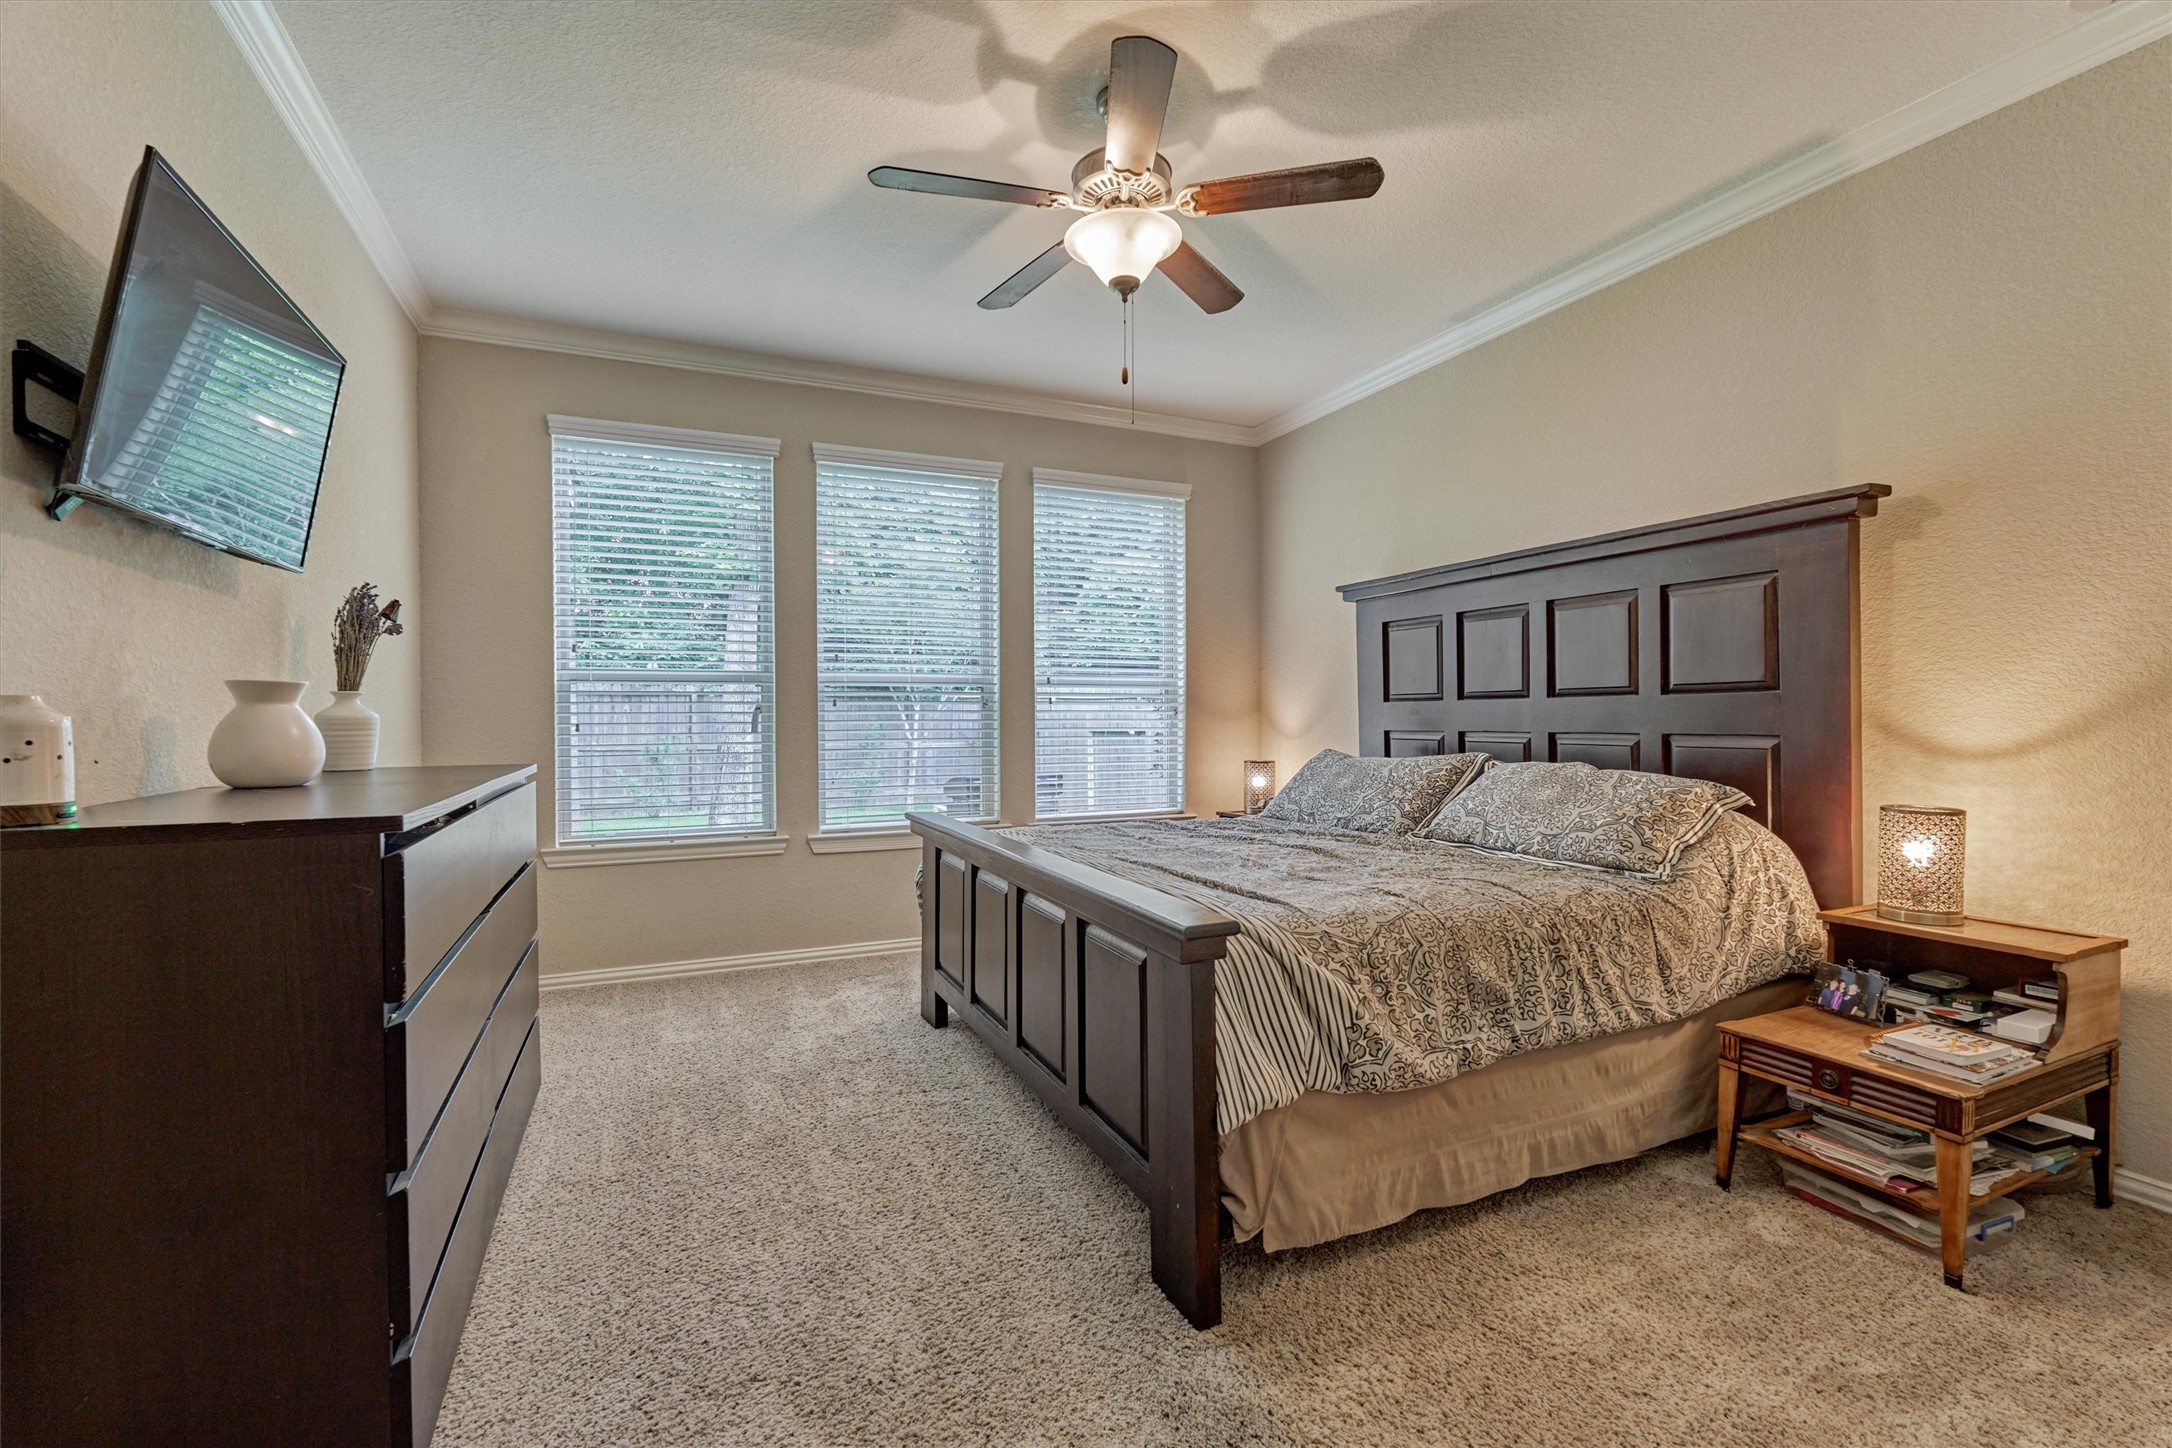 The spacious primary bedroom enjoys lovely backyard views, high end carpeted flooring, and neutral colors.